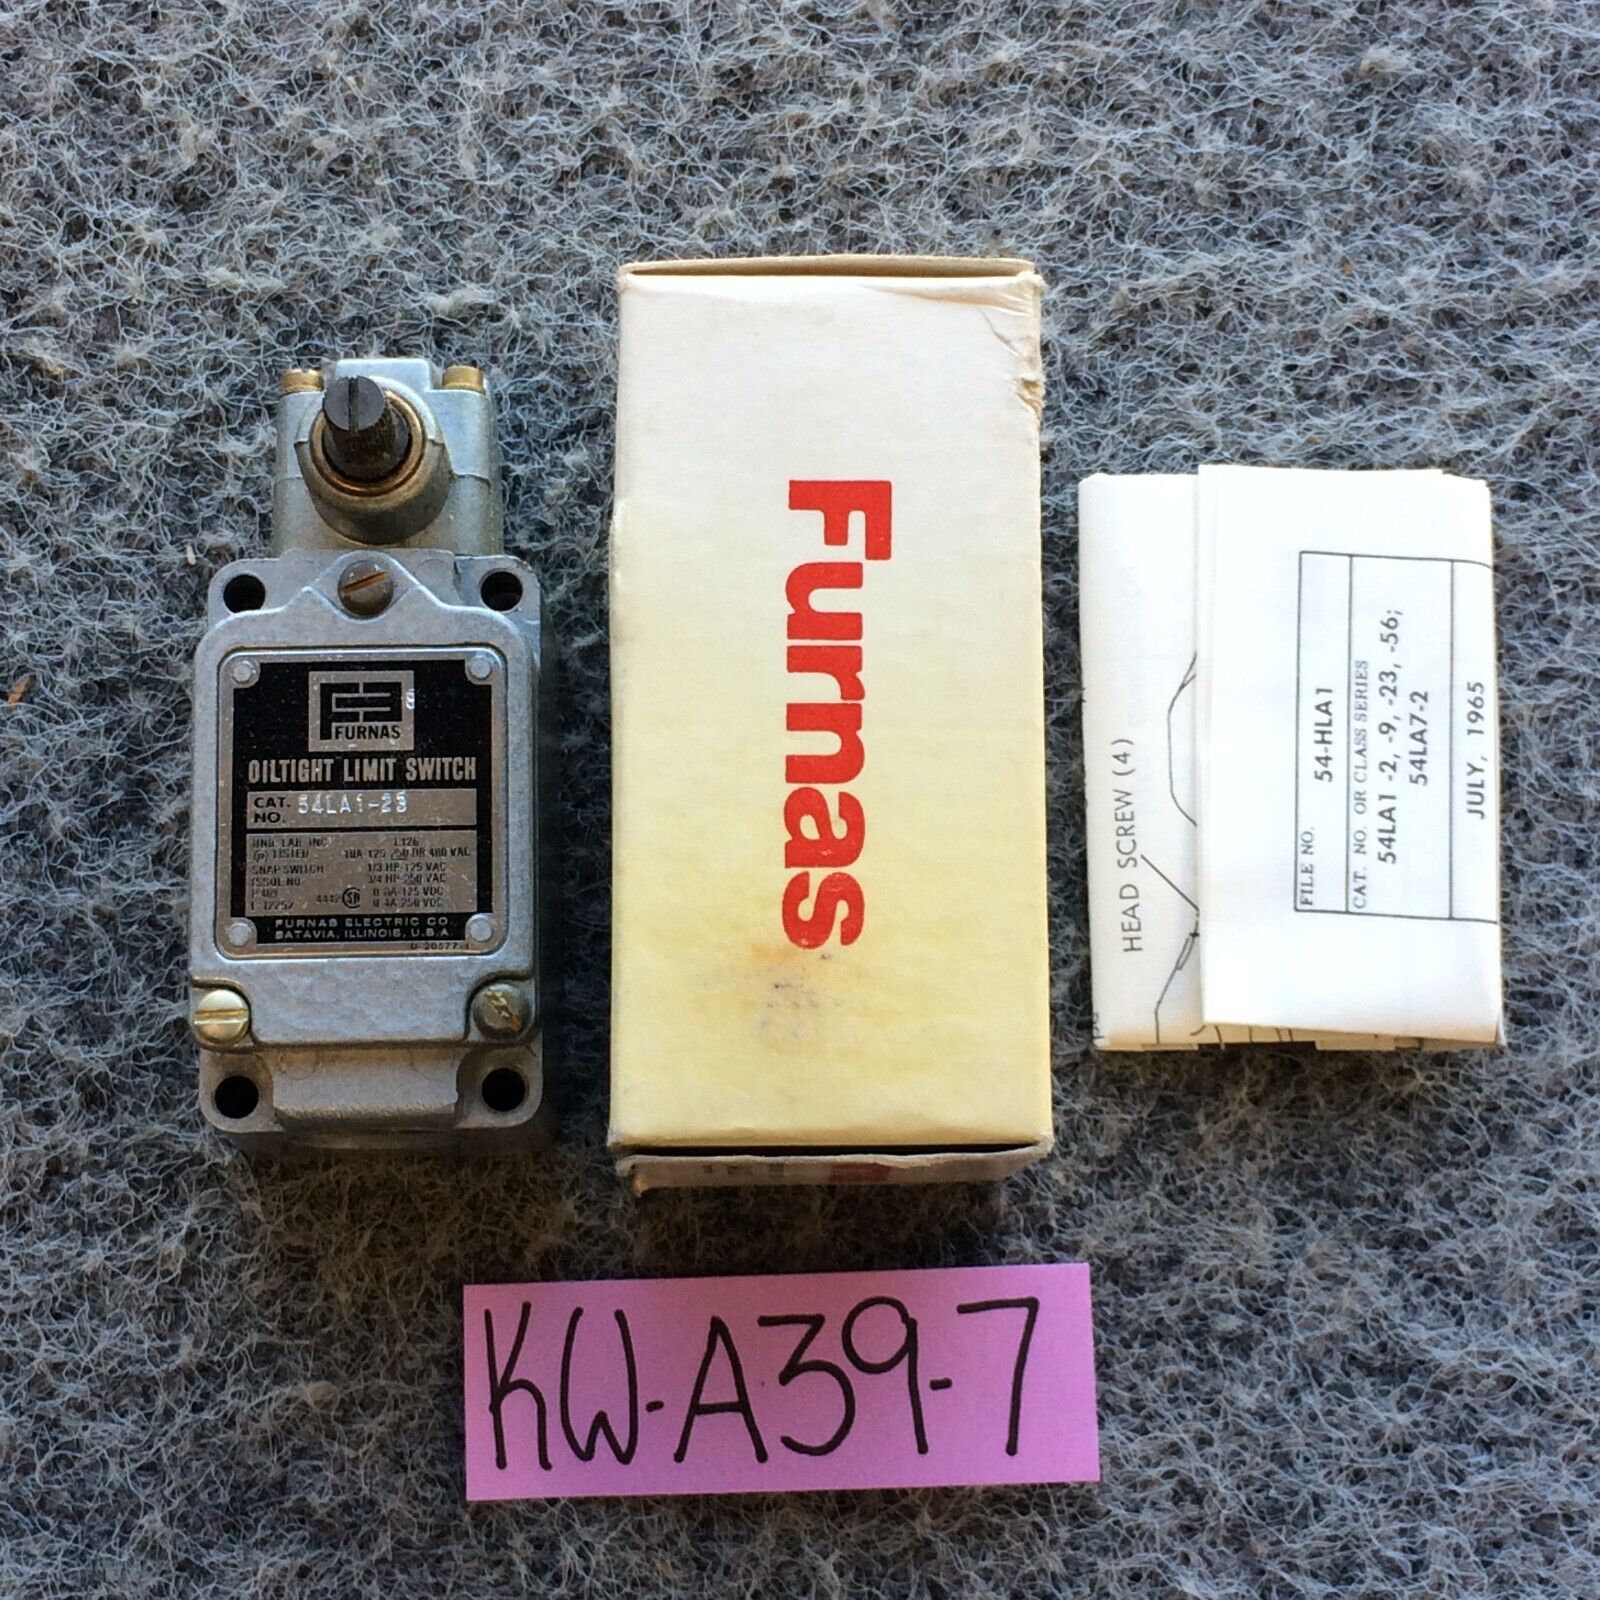 NOS Furnas 54LA123 Oil Tight Rotary Limit Switch MAKE OFFER 1 Year Warranty